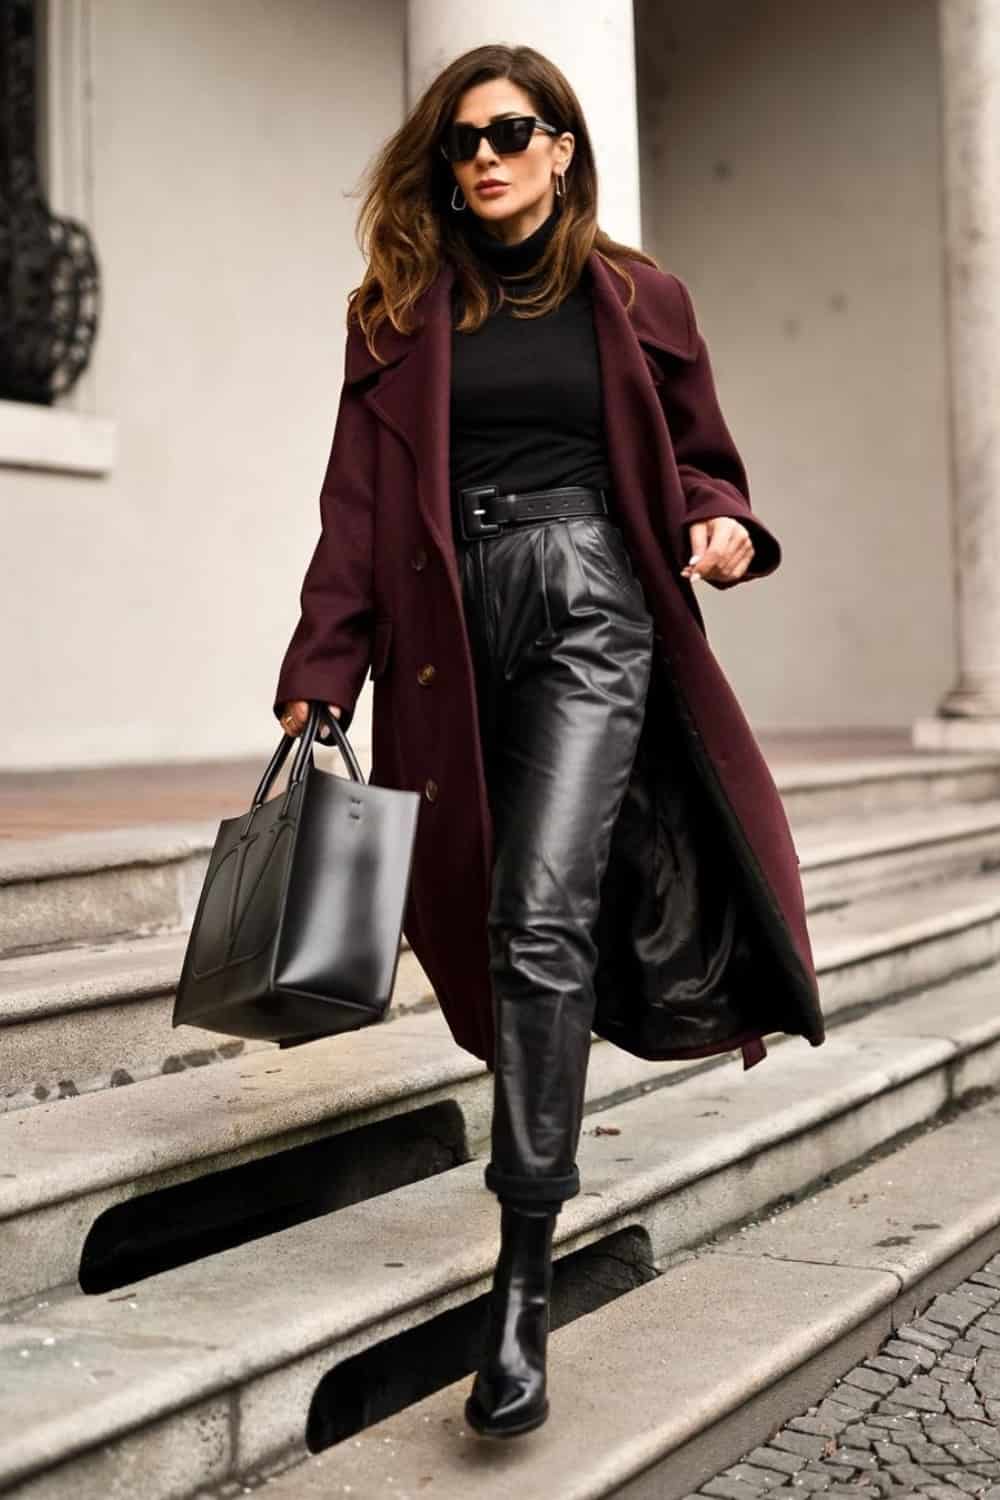 Black Turtleneck Water Outfit with Red Coat